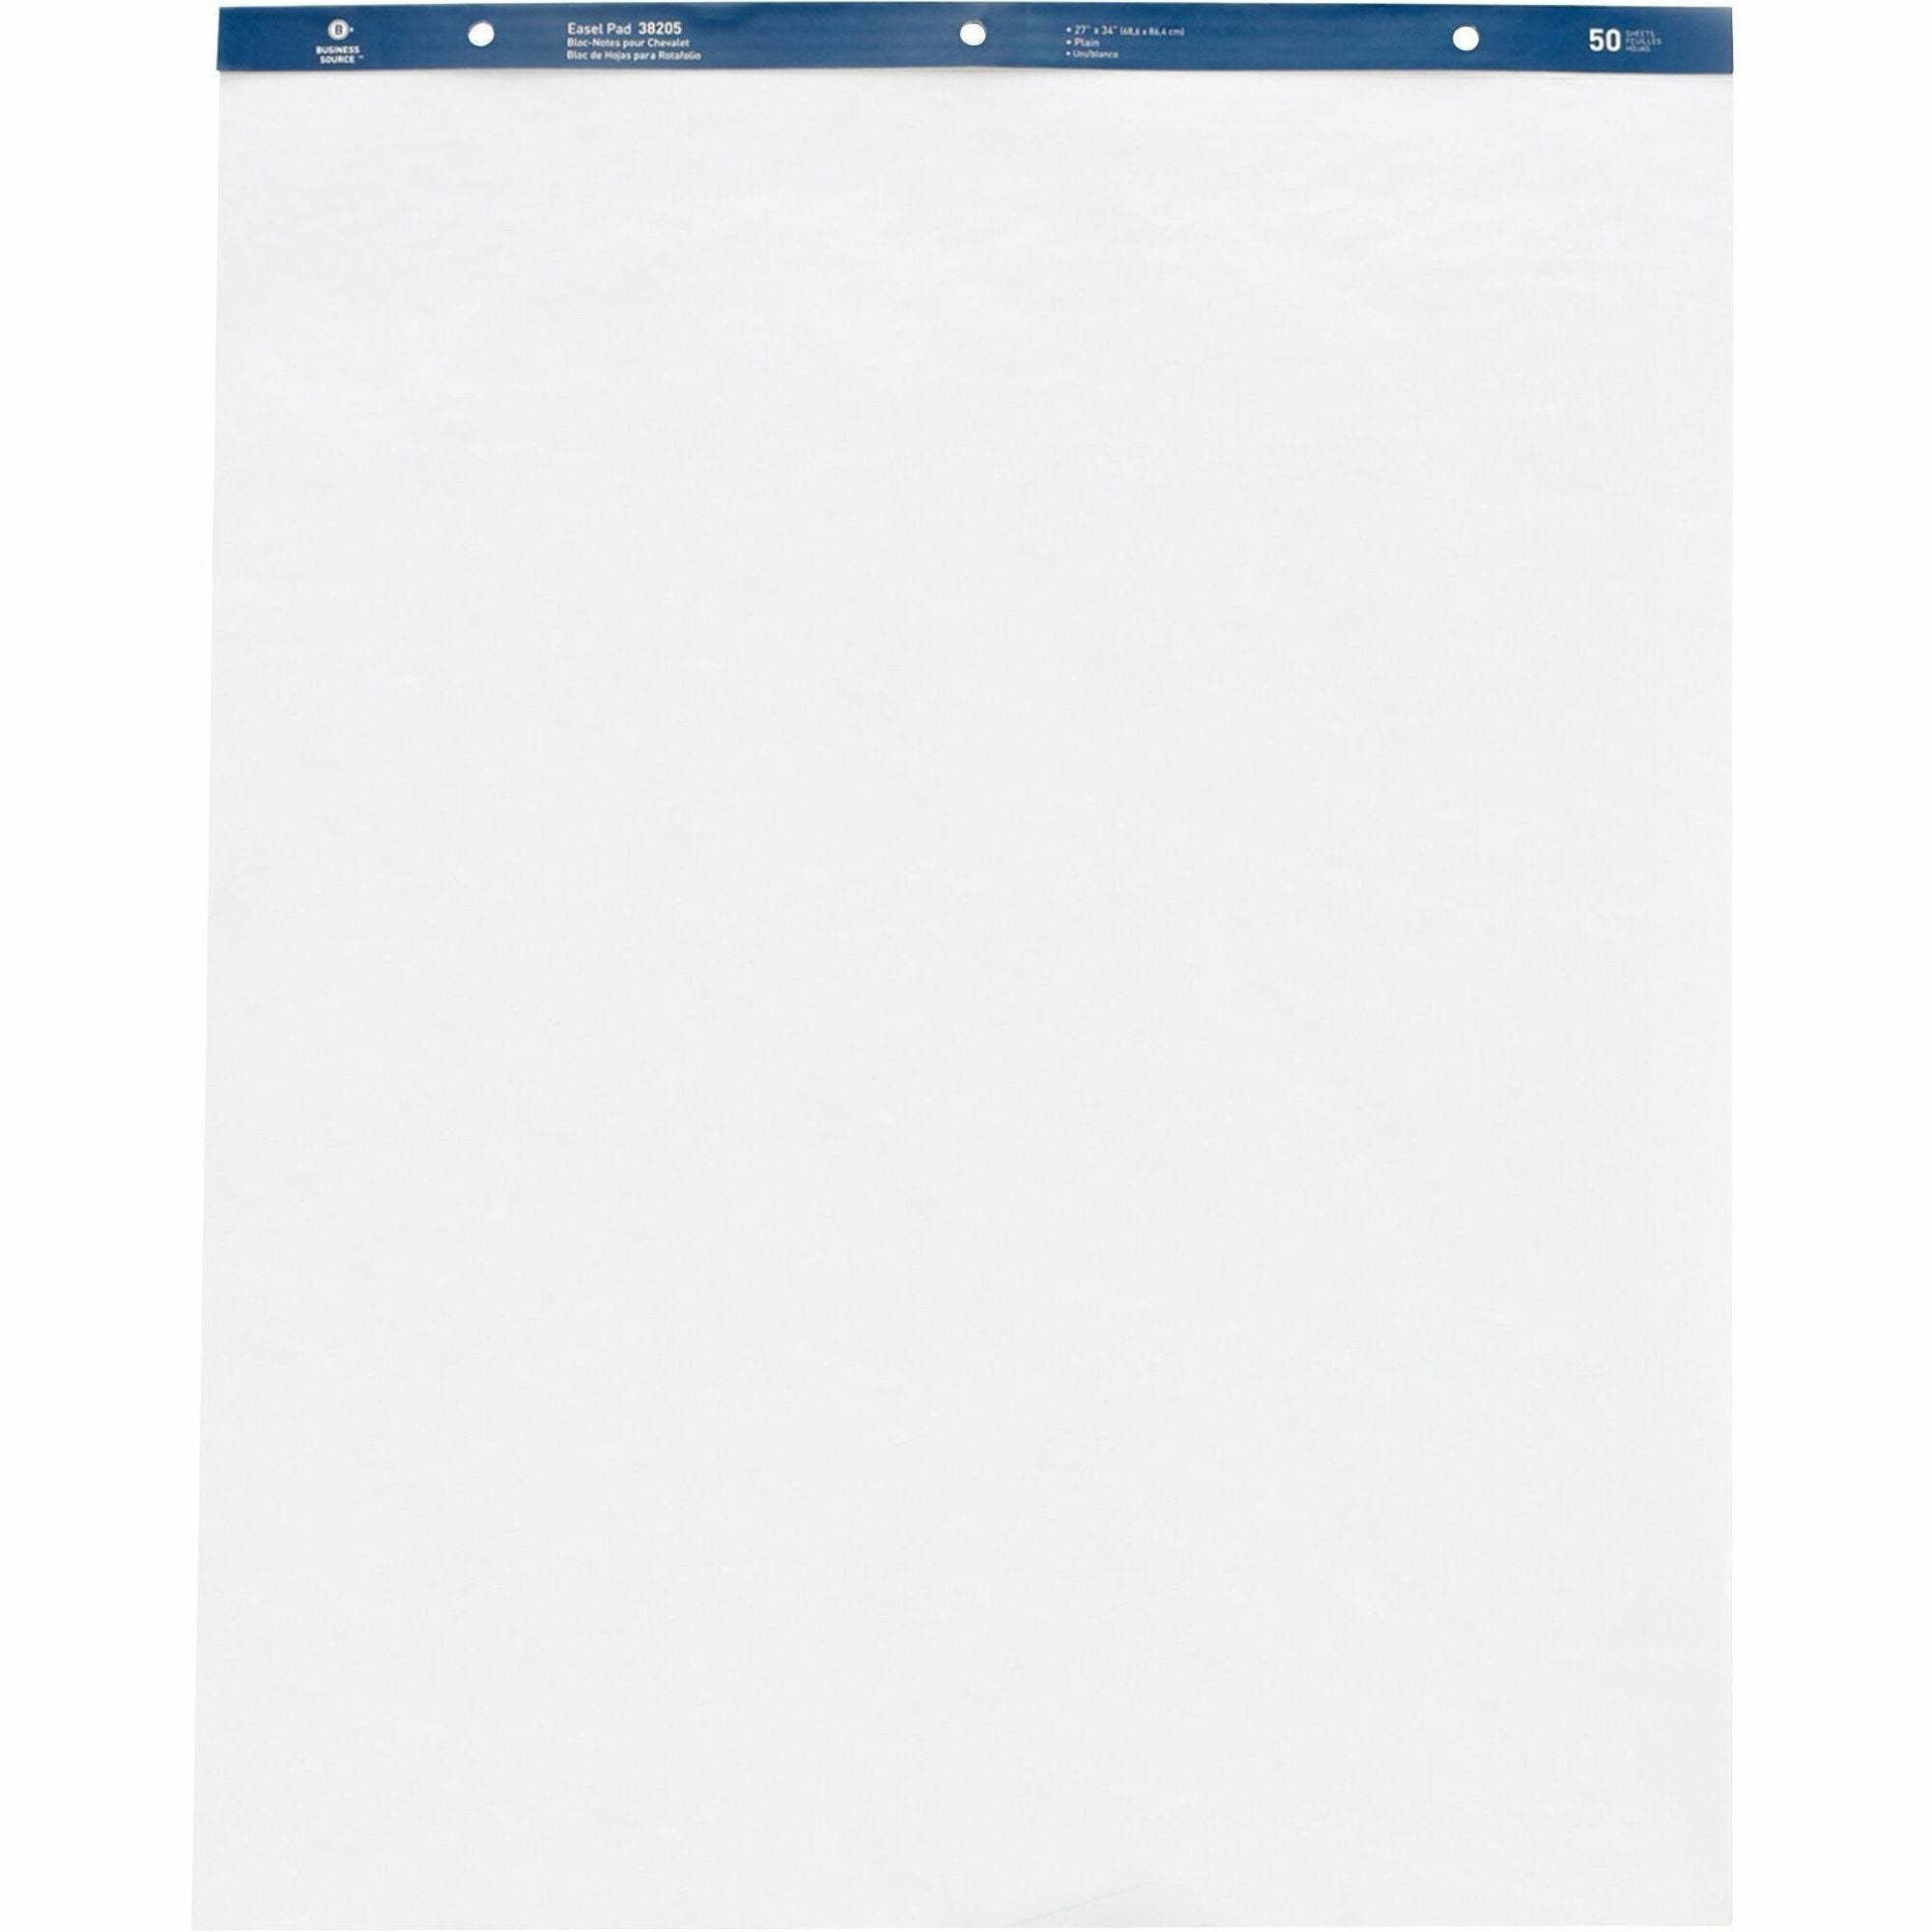 Business Source Standard Easel Pad - 50 Sheets - Plain - 15 lb Basis Weight - 27" x 34" - White Paper - Perforated - 4 / Carton - 